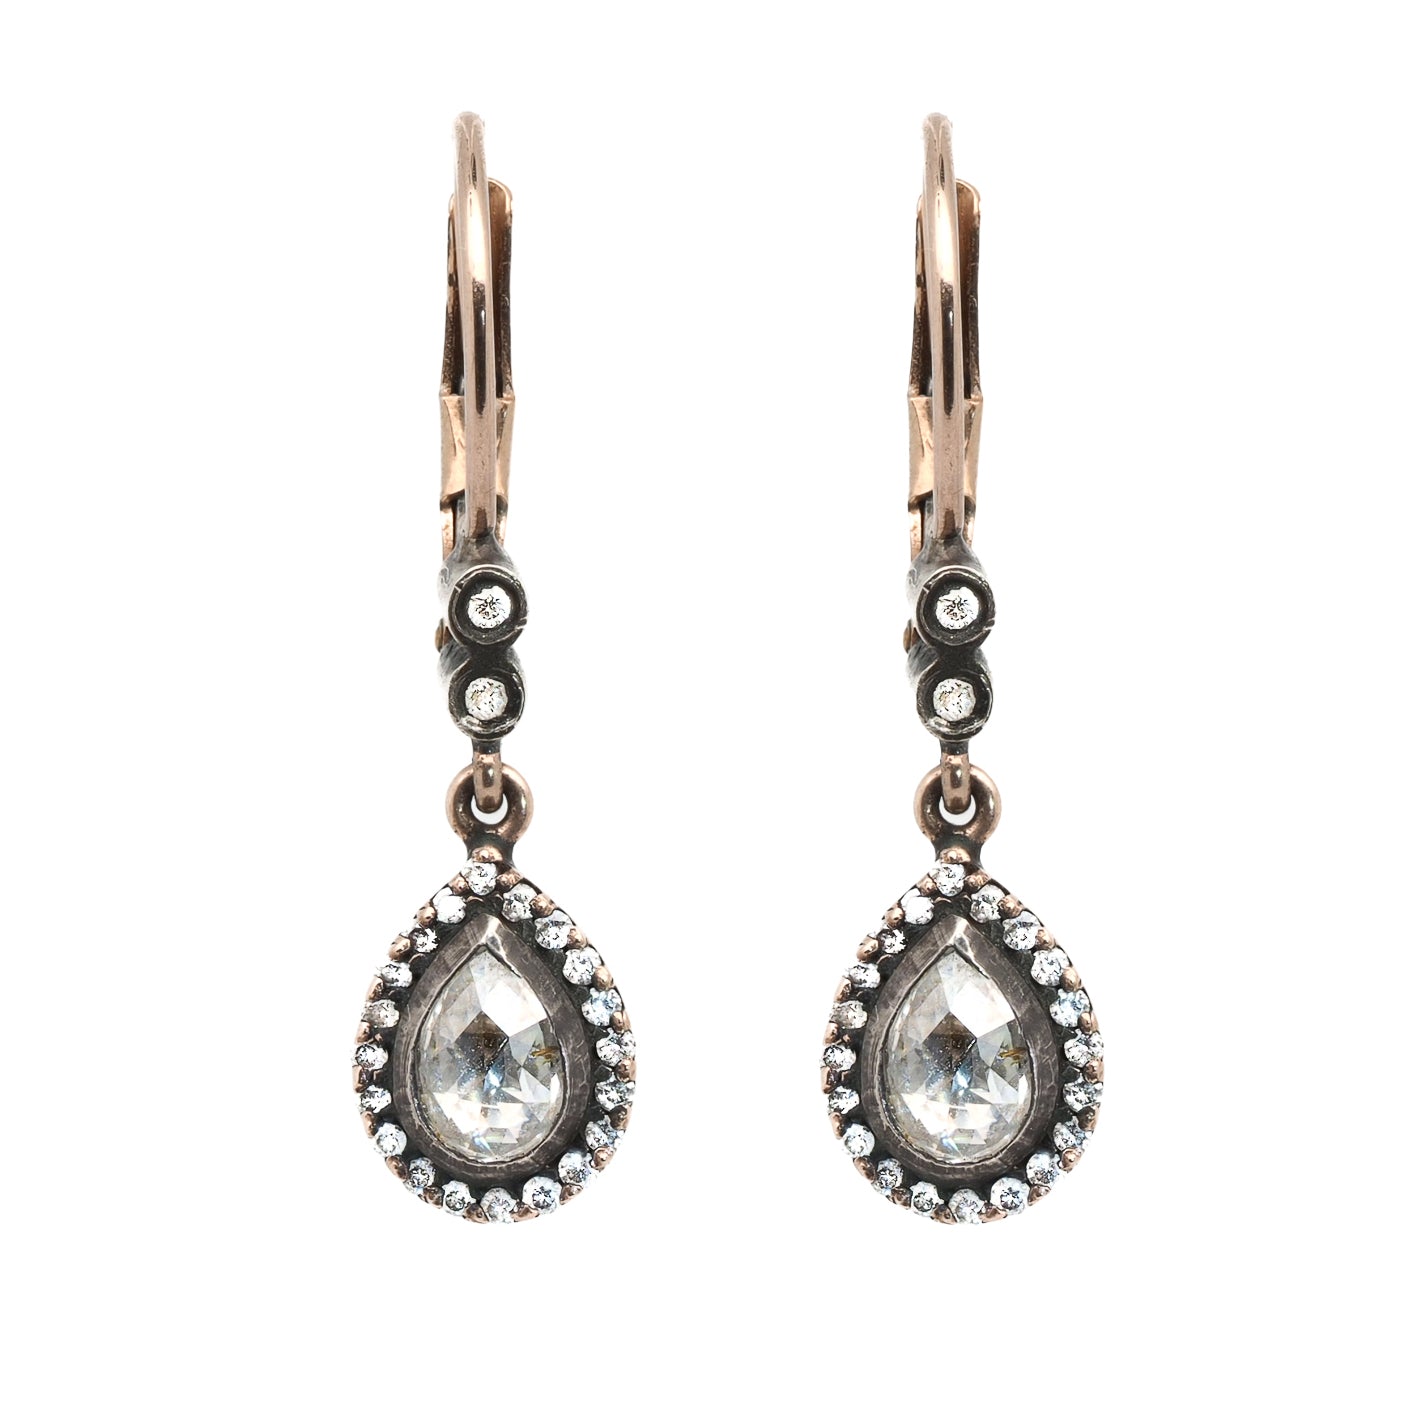 Pear Shaped Diamond Earrings - Handcrafted with 8k Gold and 1.32ct Diamonds.